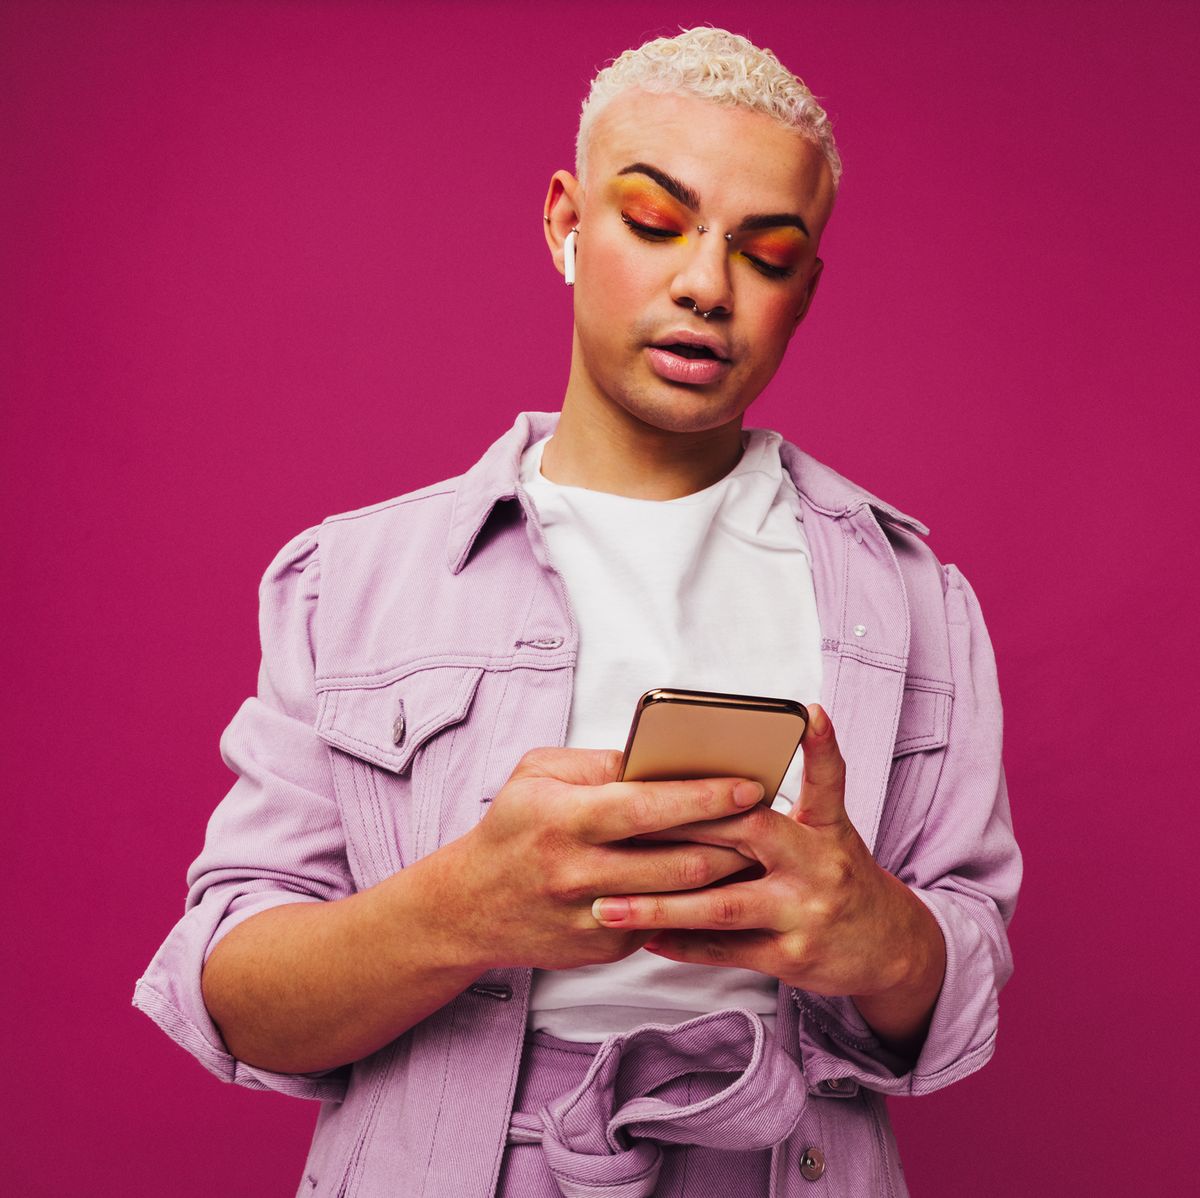 browsing trendy podcasts stylish young man using a smartphone while wearing wireless earphones in a studio non conforming queer man standing alone against a purple background